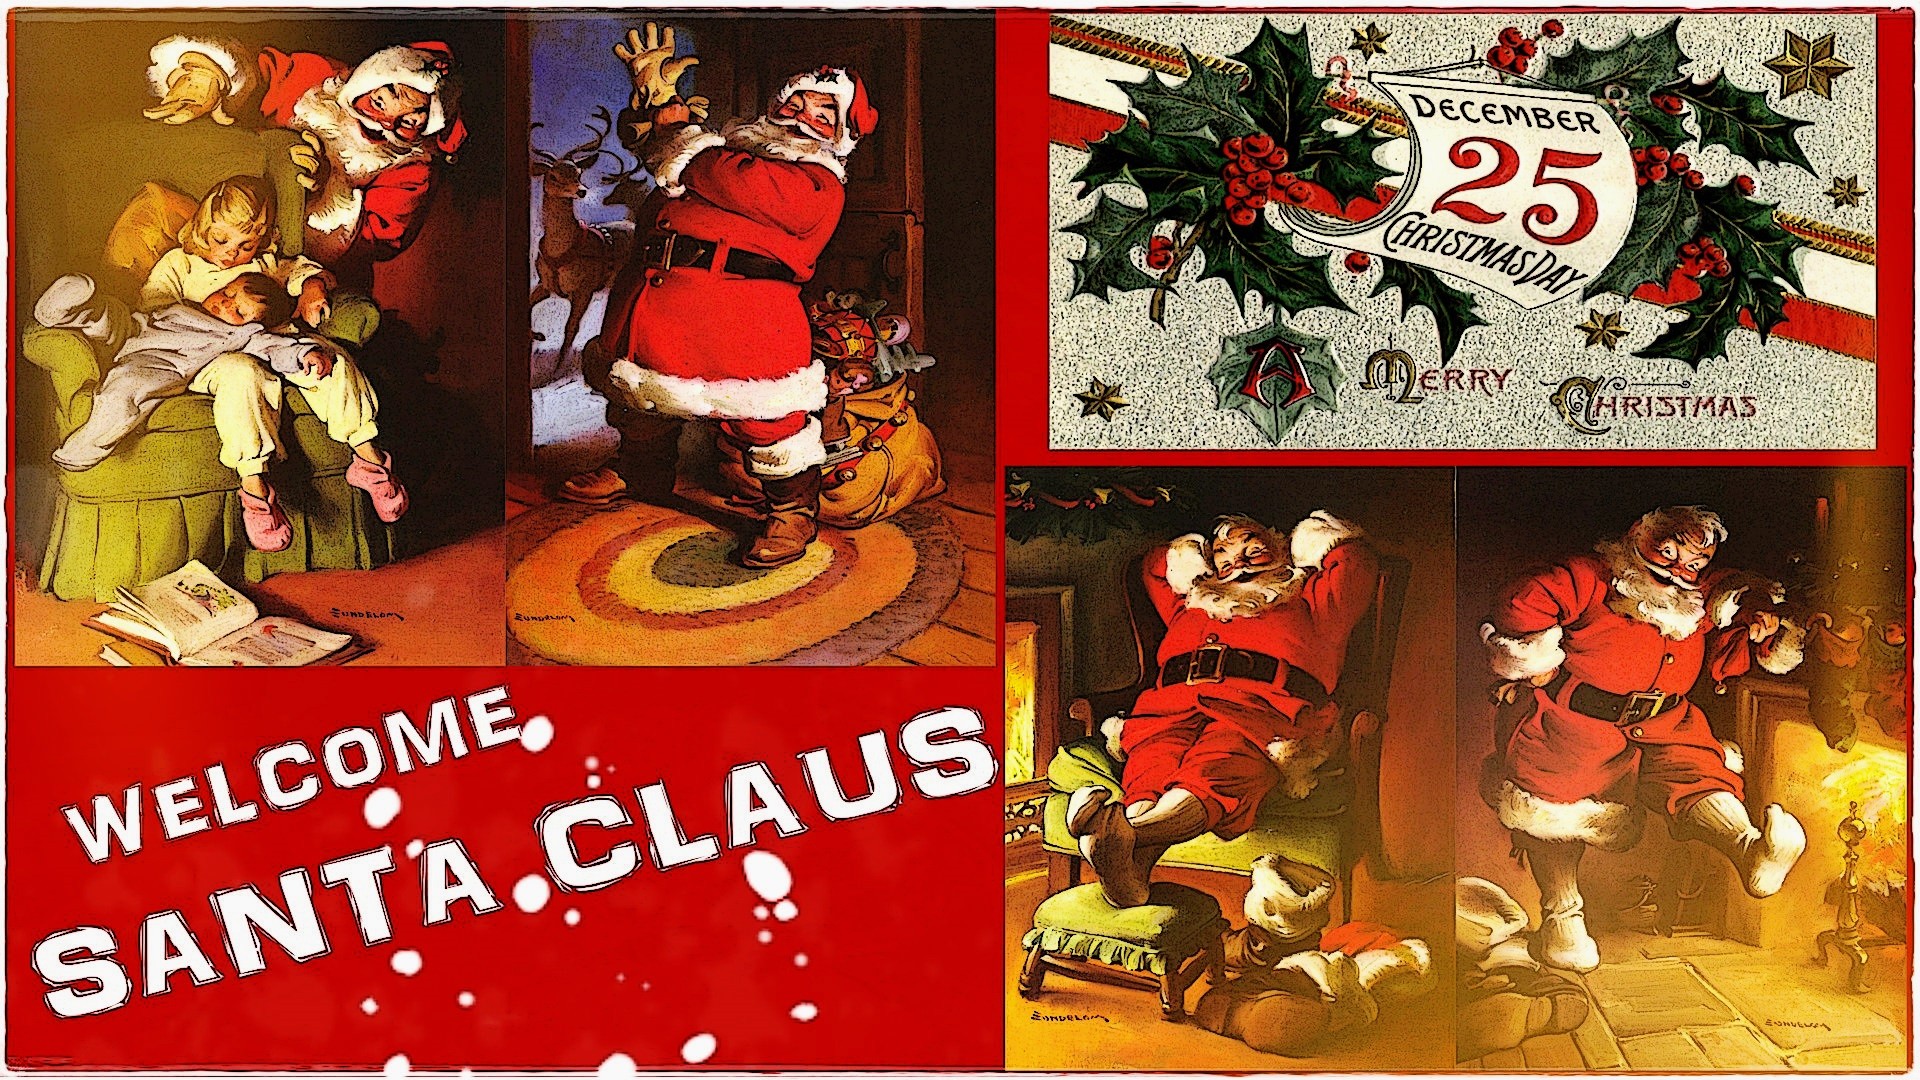 General 1920x1080 Santa Claus Christmas holiday collage numbers